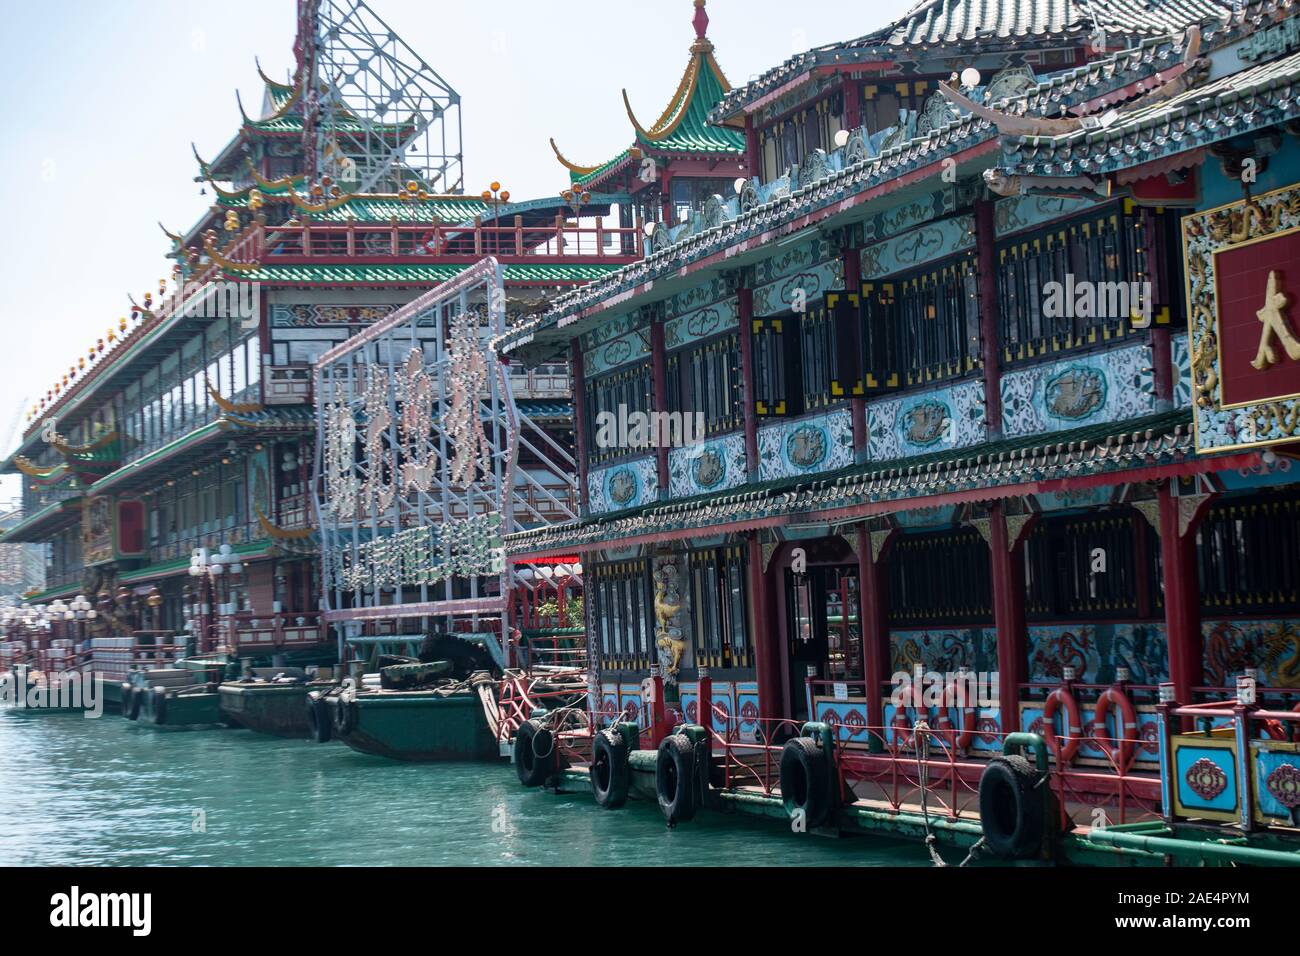 The famous Jumbo Floating Restaurant in Hong Kong Island's Aberdeen Harbour Stock Photo